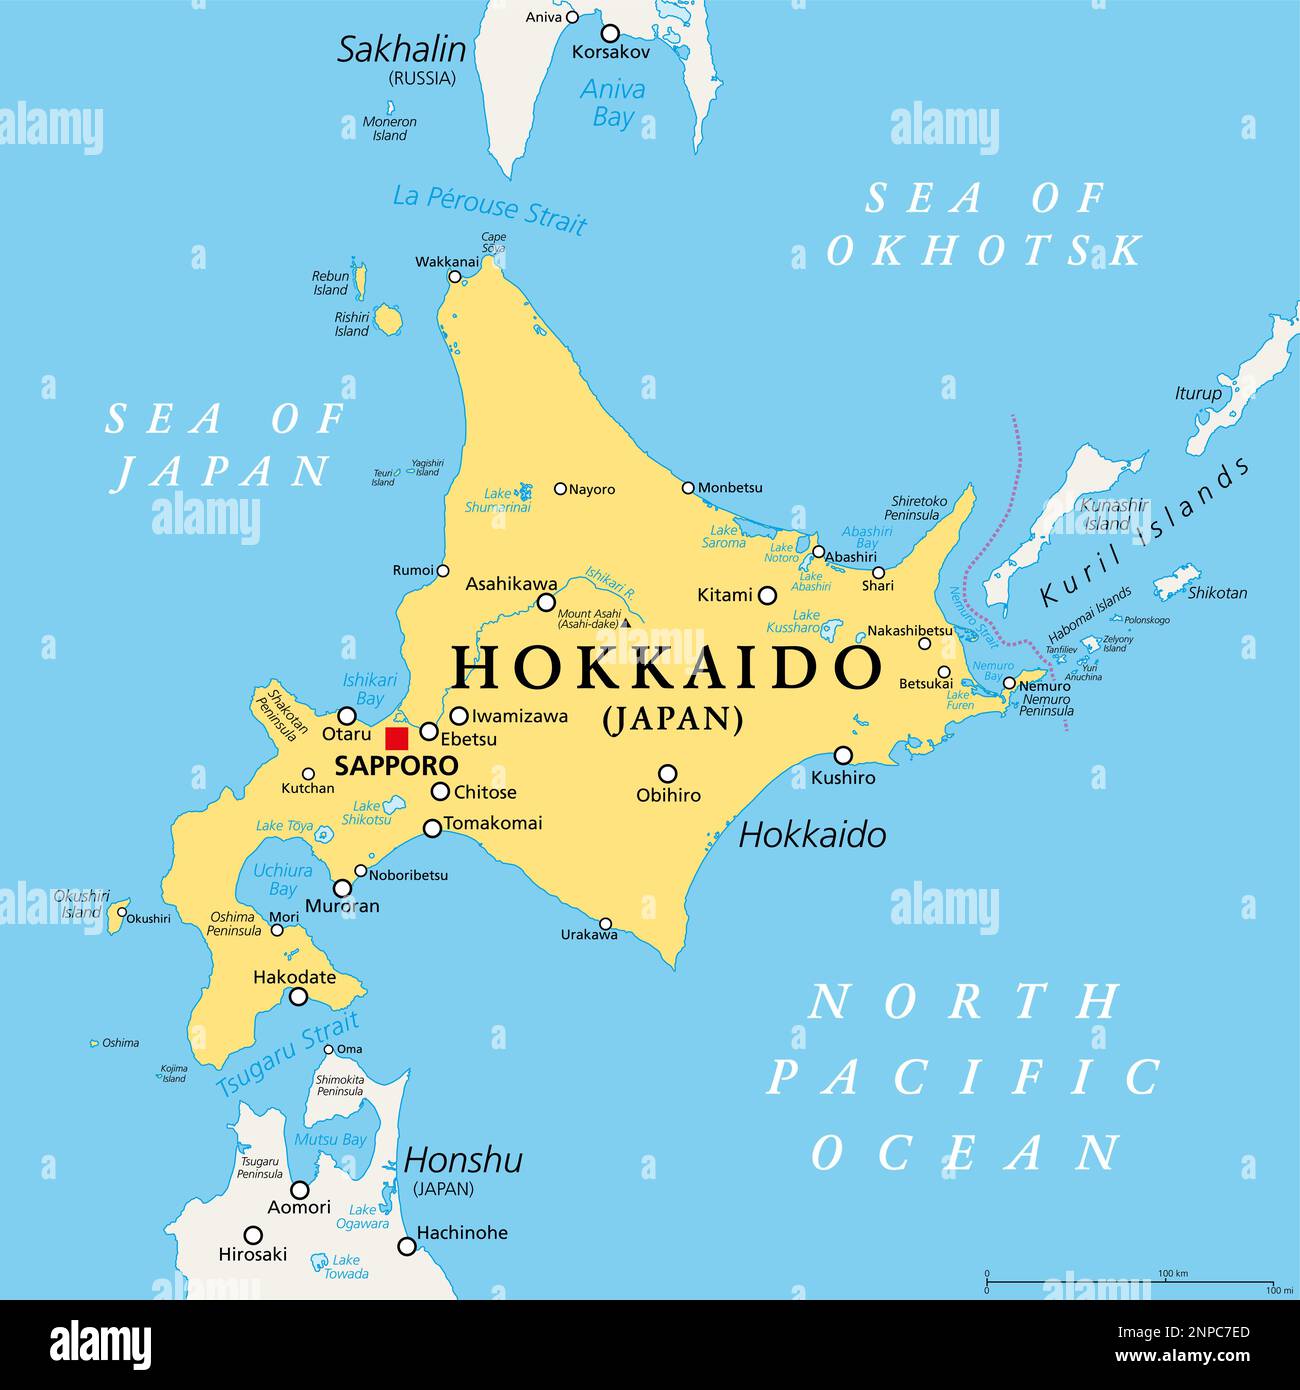 Hokkaido, second largest island of Japan, political map, with capital Sapporo. Comprises the largest and northernmost prefecture. Stock Photo